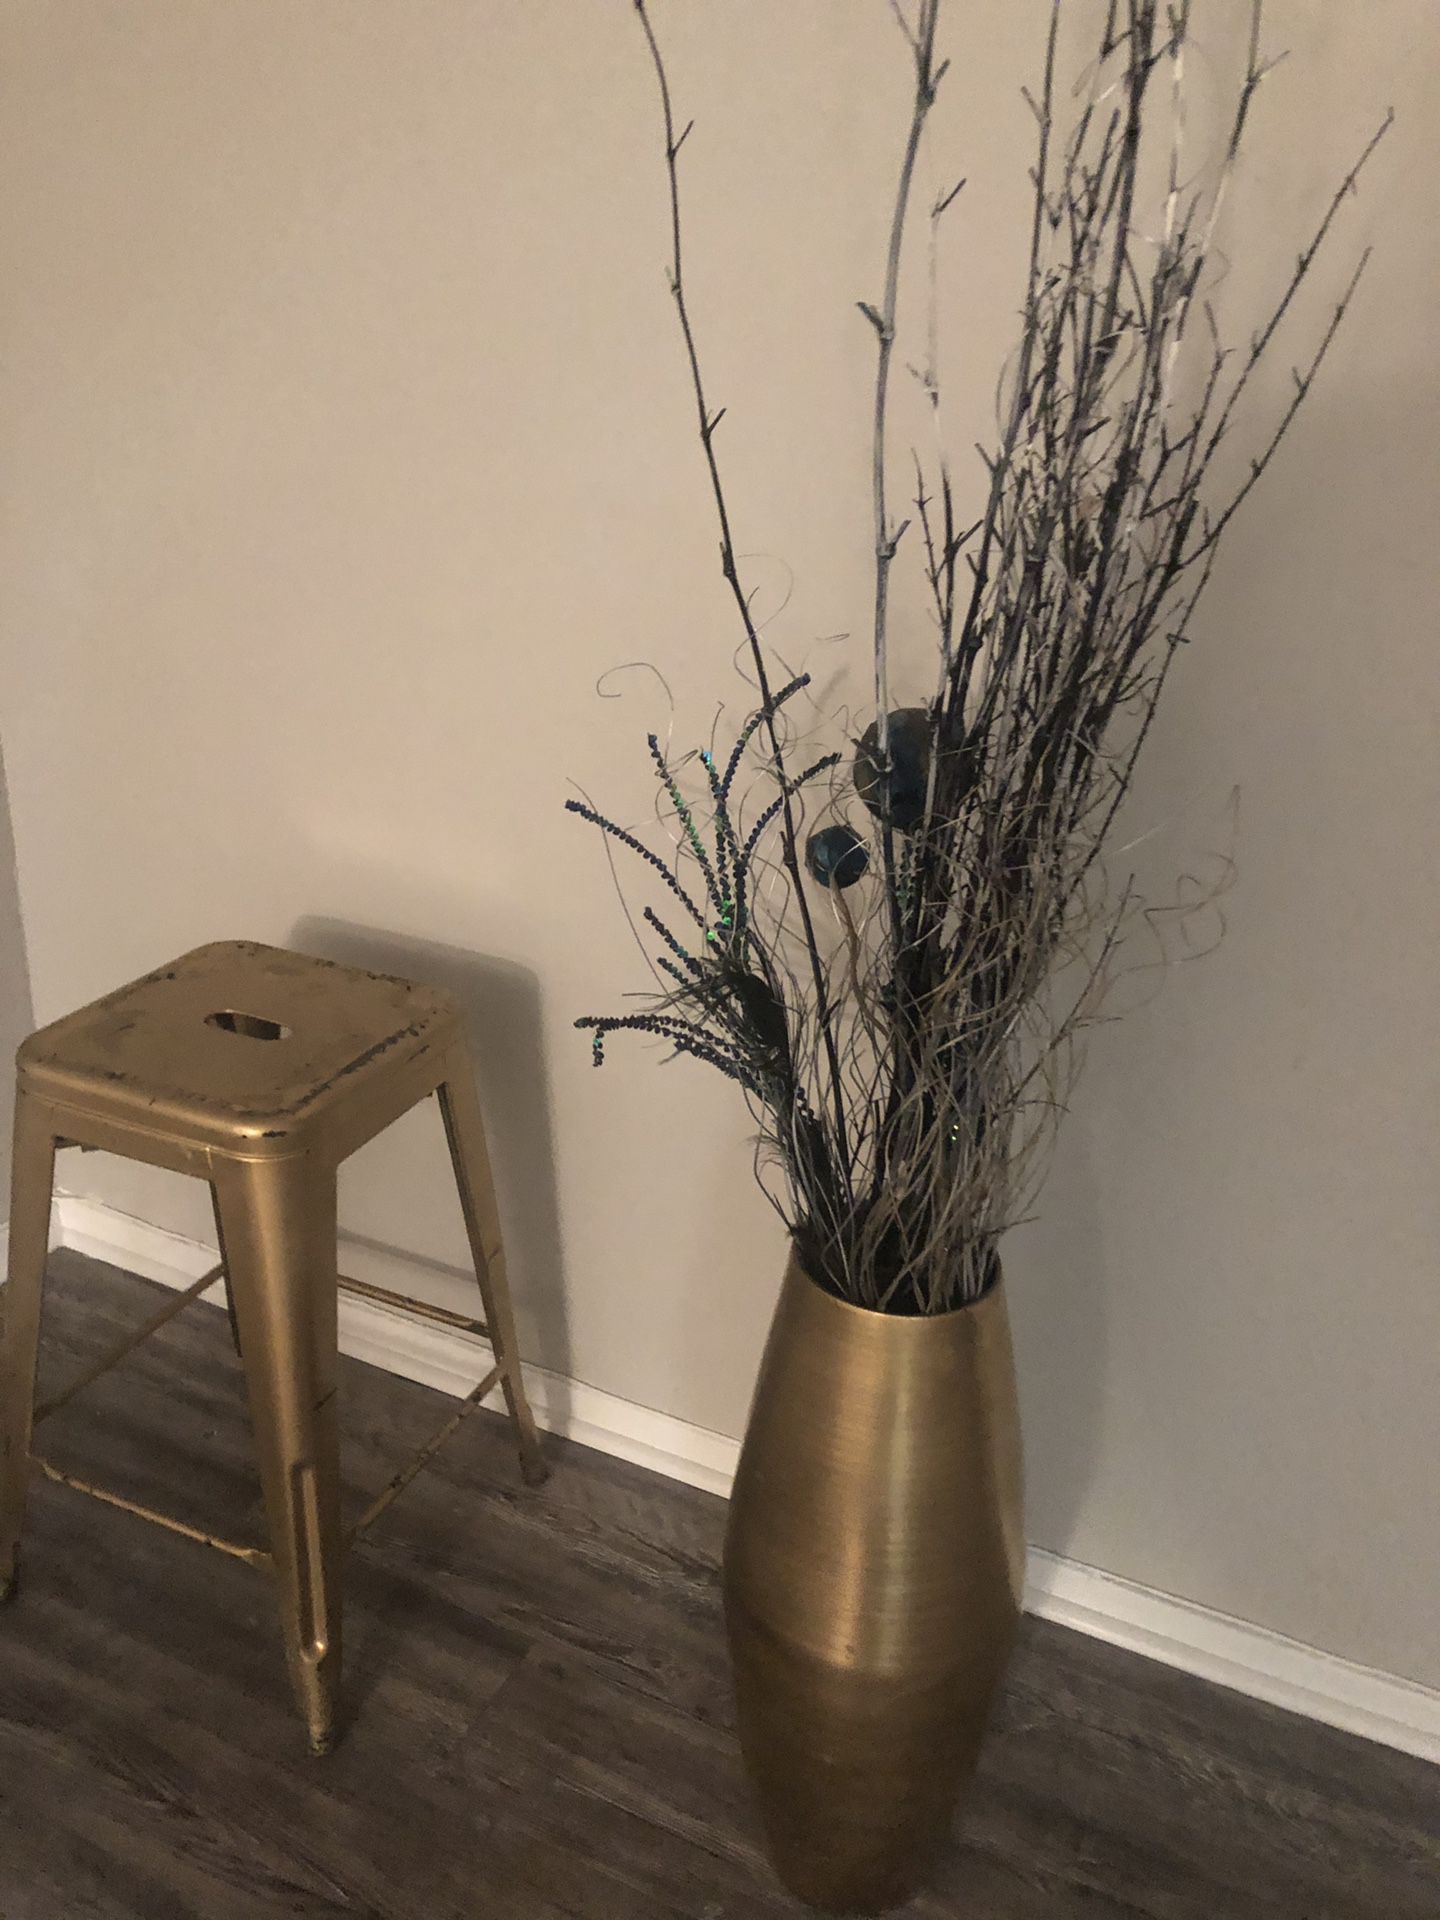 Two bar stools and vase decor $40 for all